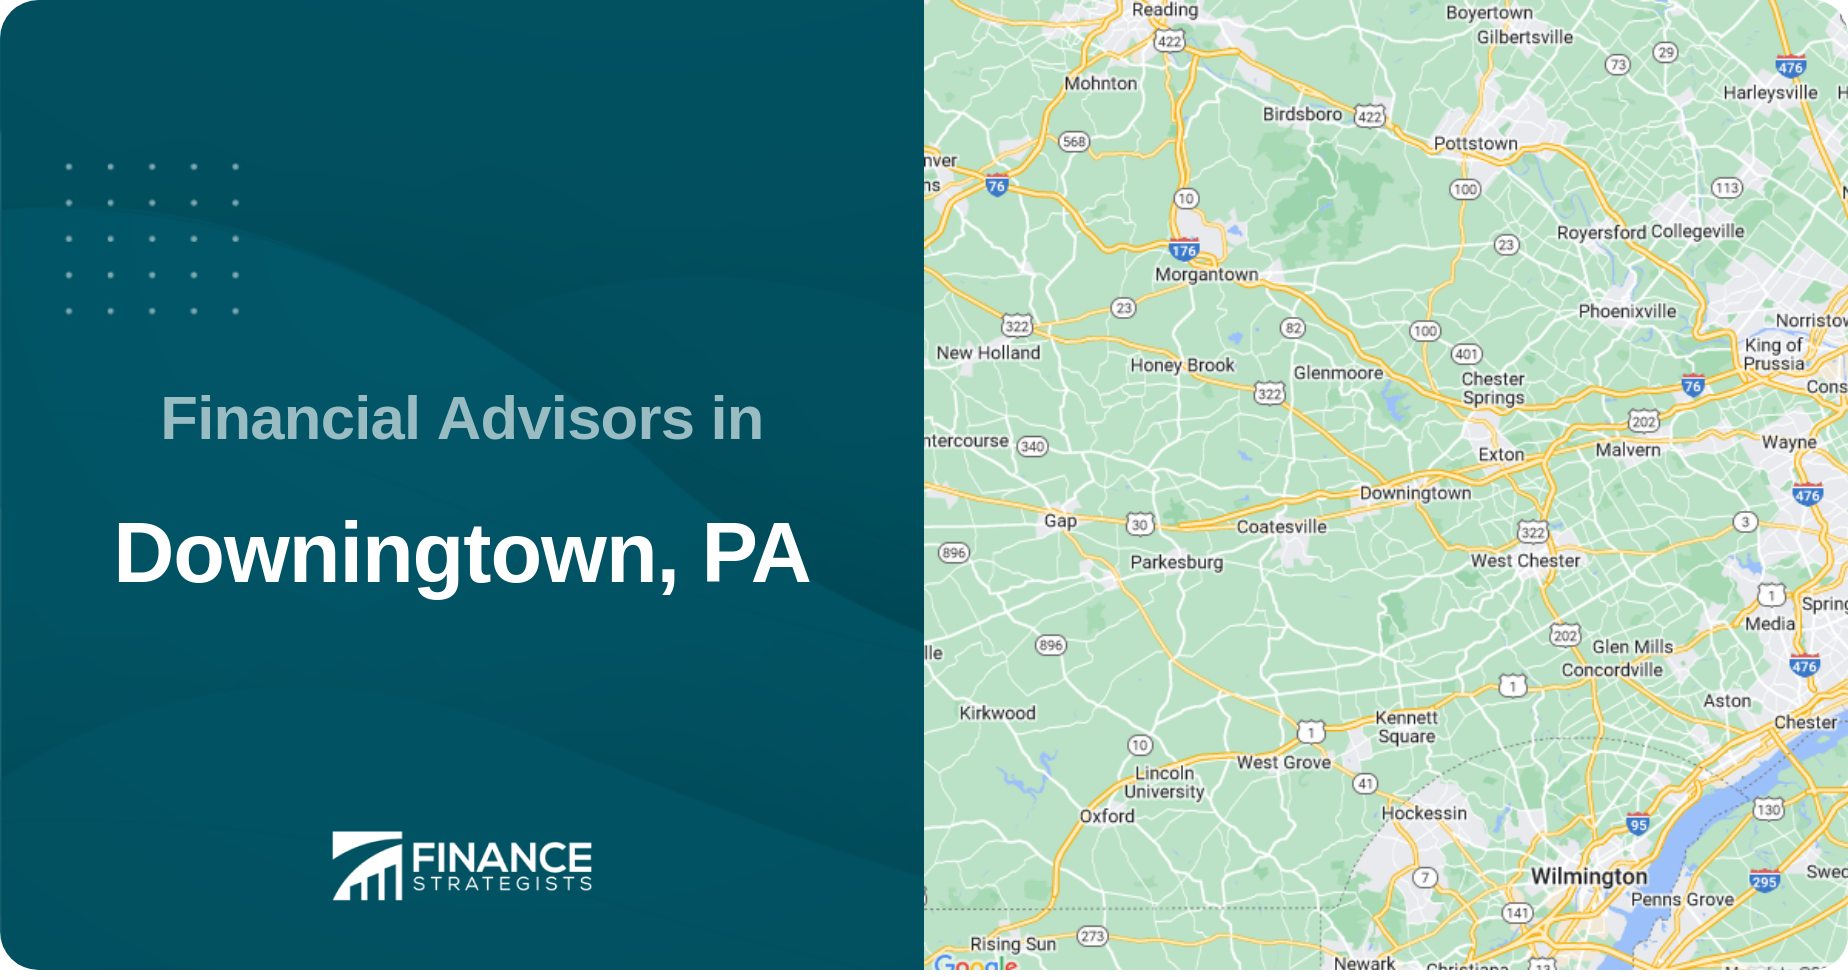 Financial Advisors in Downingtown, PA